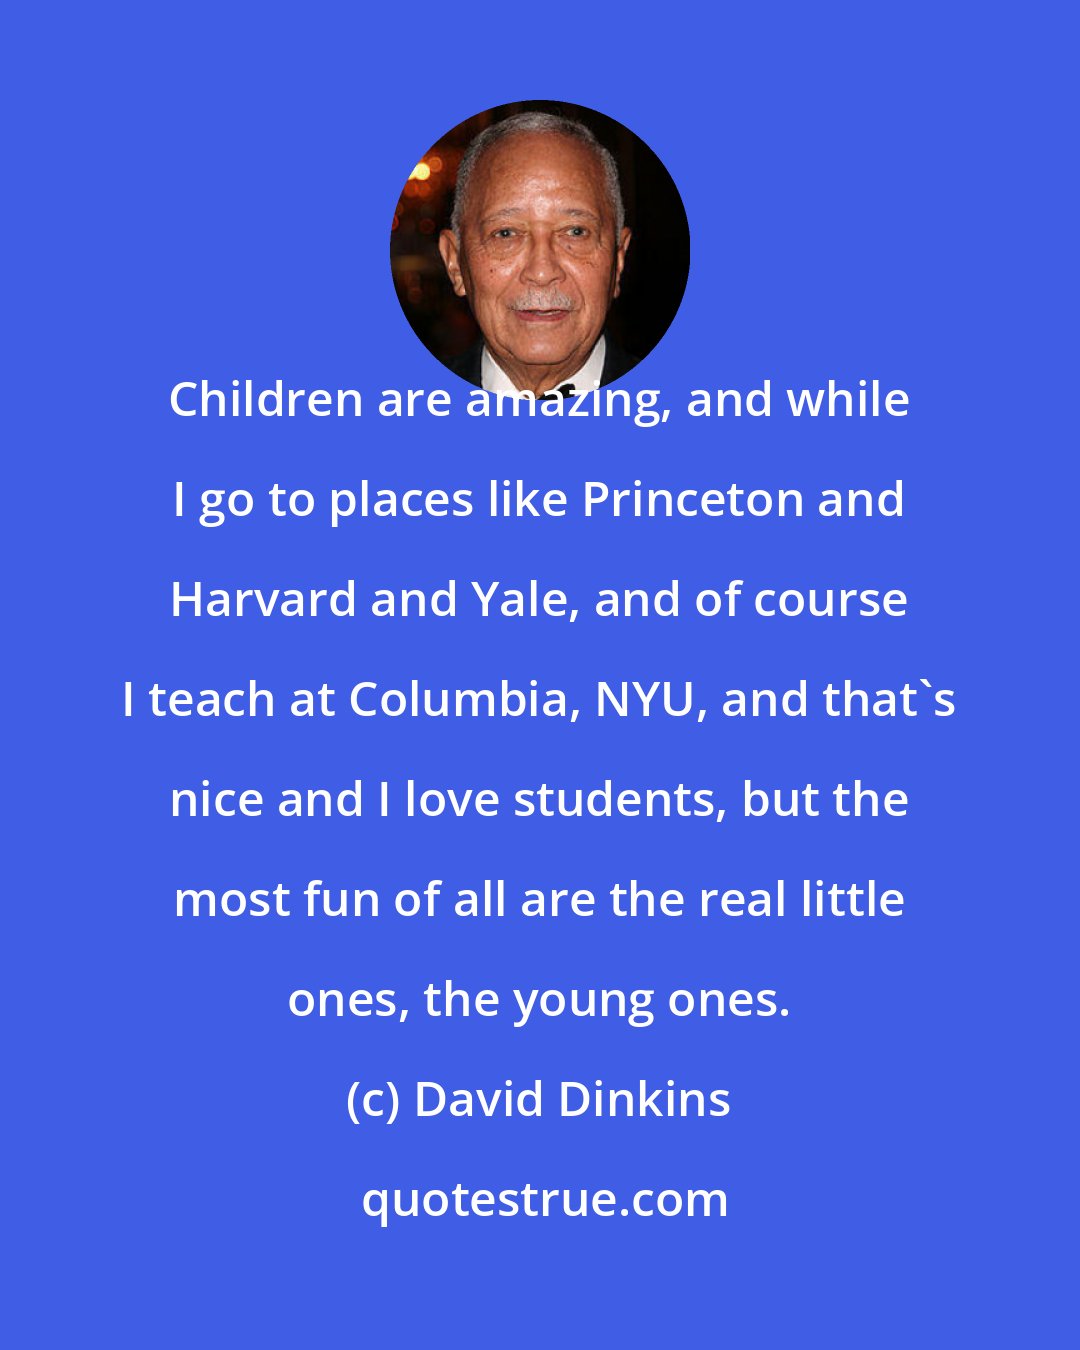 David Dinkins: Children are amazing, and while I go to places like Princeton and Harvard and Yale, and of course I teach at Columbia, NYU, and that's nice and I love students, but the most fun of all are the real little ones, the young ones.